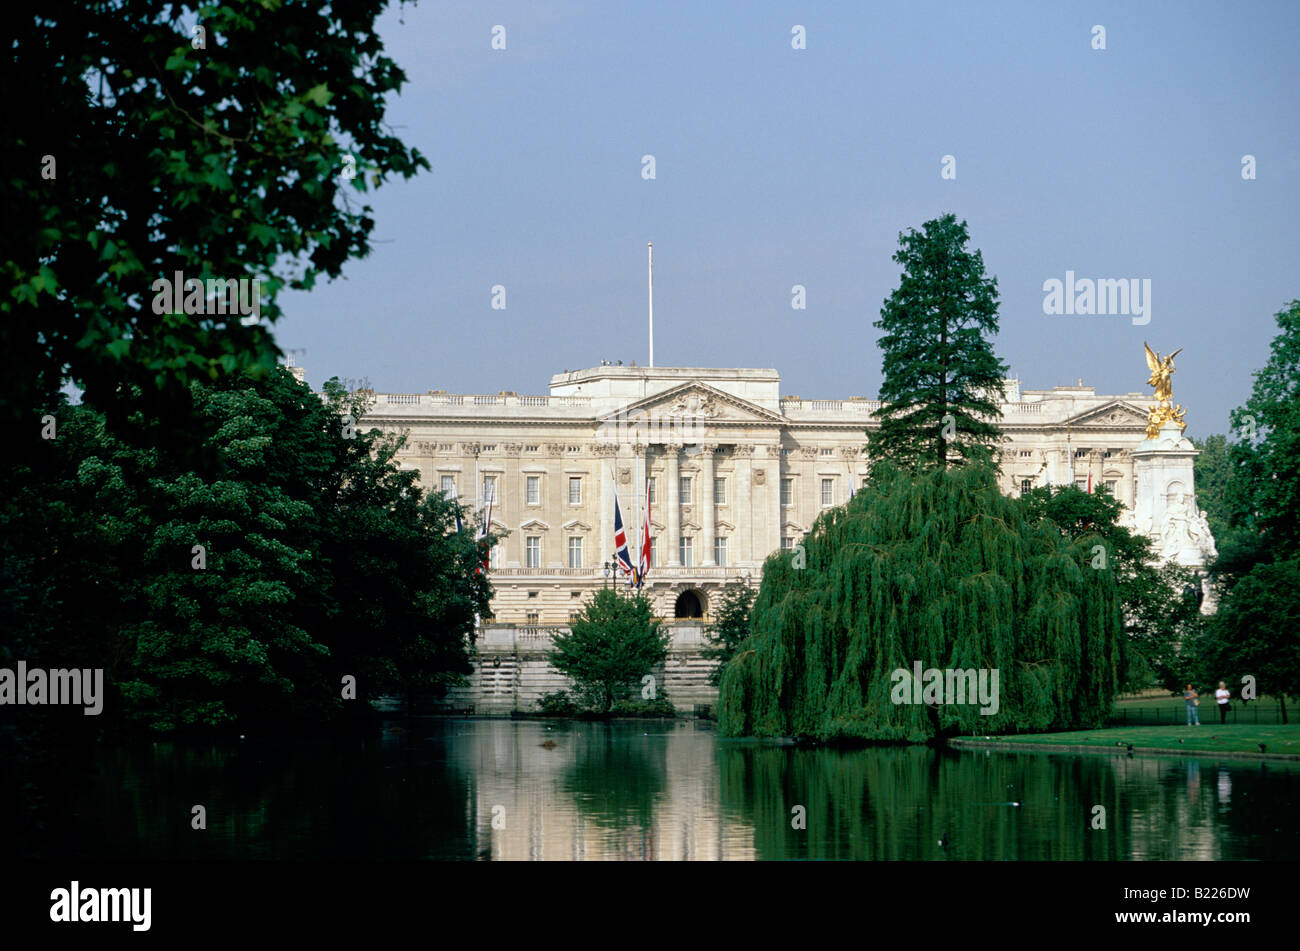 Exterior of the Buckingham Palace viewd from St James s Garden London Stock Photo